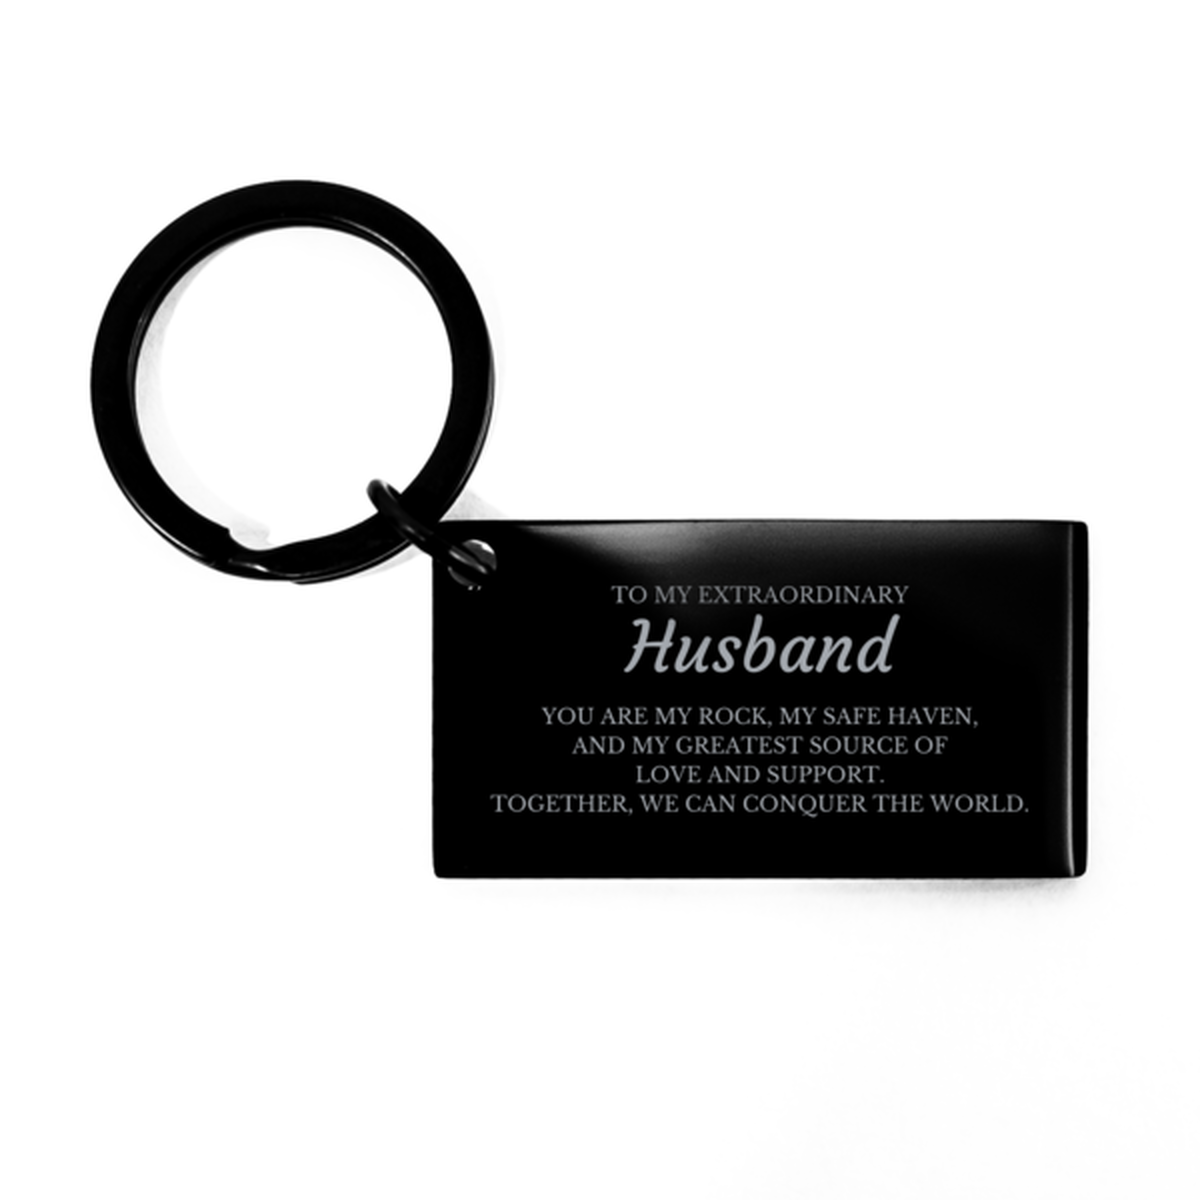 To My Extraordinary Husband Gifts, Together, we can conquer the world, Birthday Keychain For Husband, Christmas Gifts For Husband